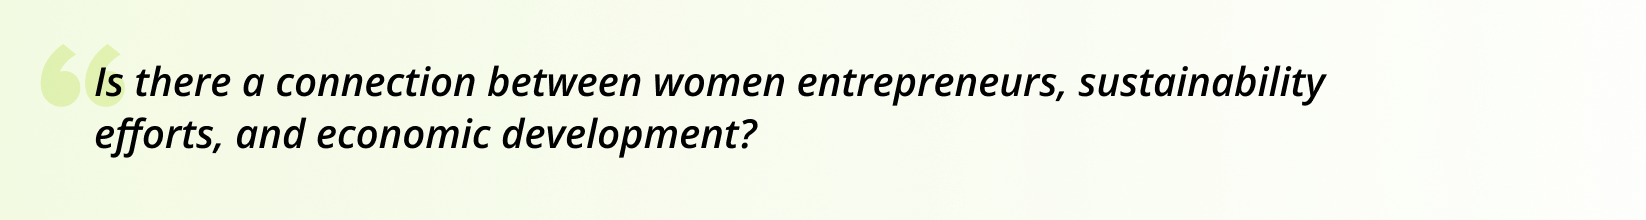 Is there a connection between women entrepreneurs, sustainability efforts, and economic development?